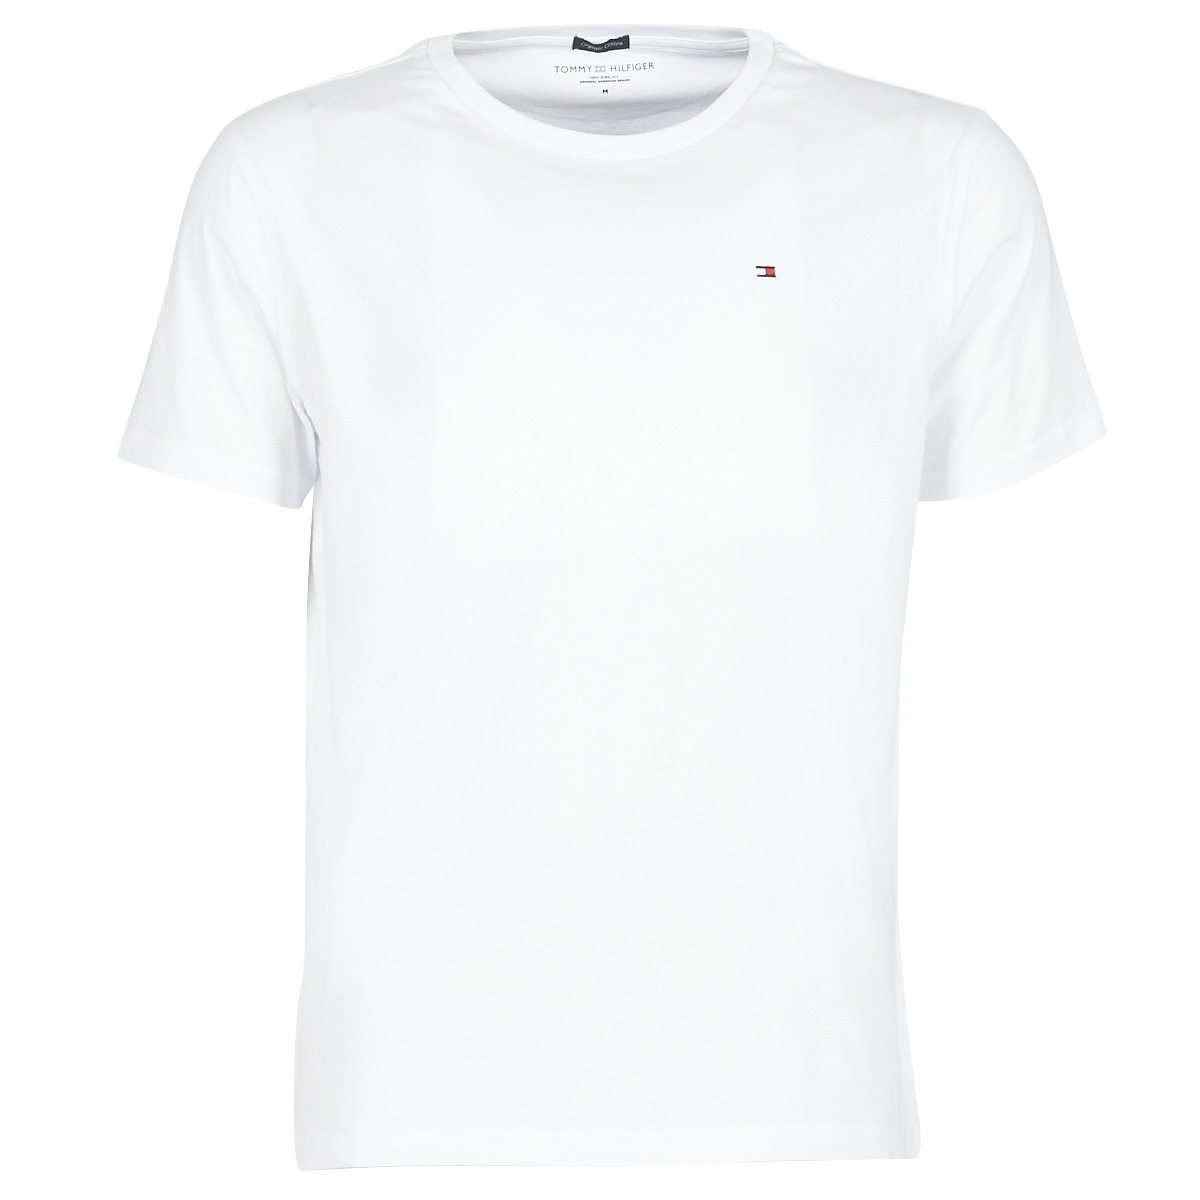 Tommy Hilfiger COTTON Free short-sleeved White t-shirts delivery | Clothing SLEEPWEAR-2S87904671 Spartoo ICON - - Men ! NET